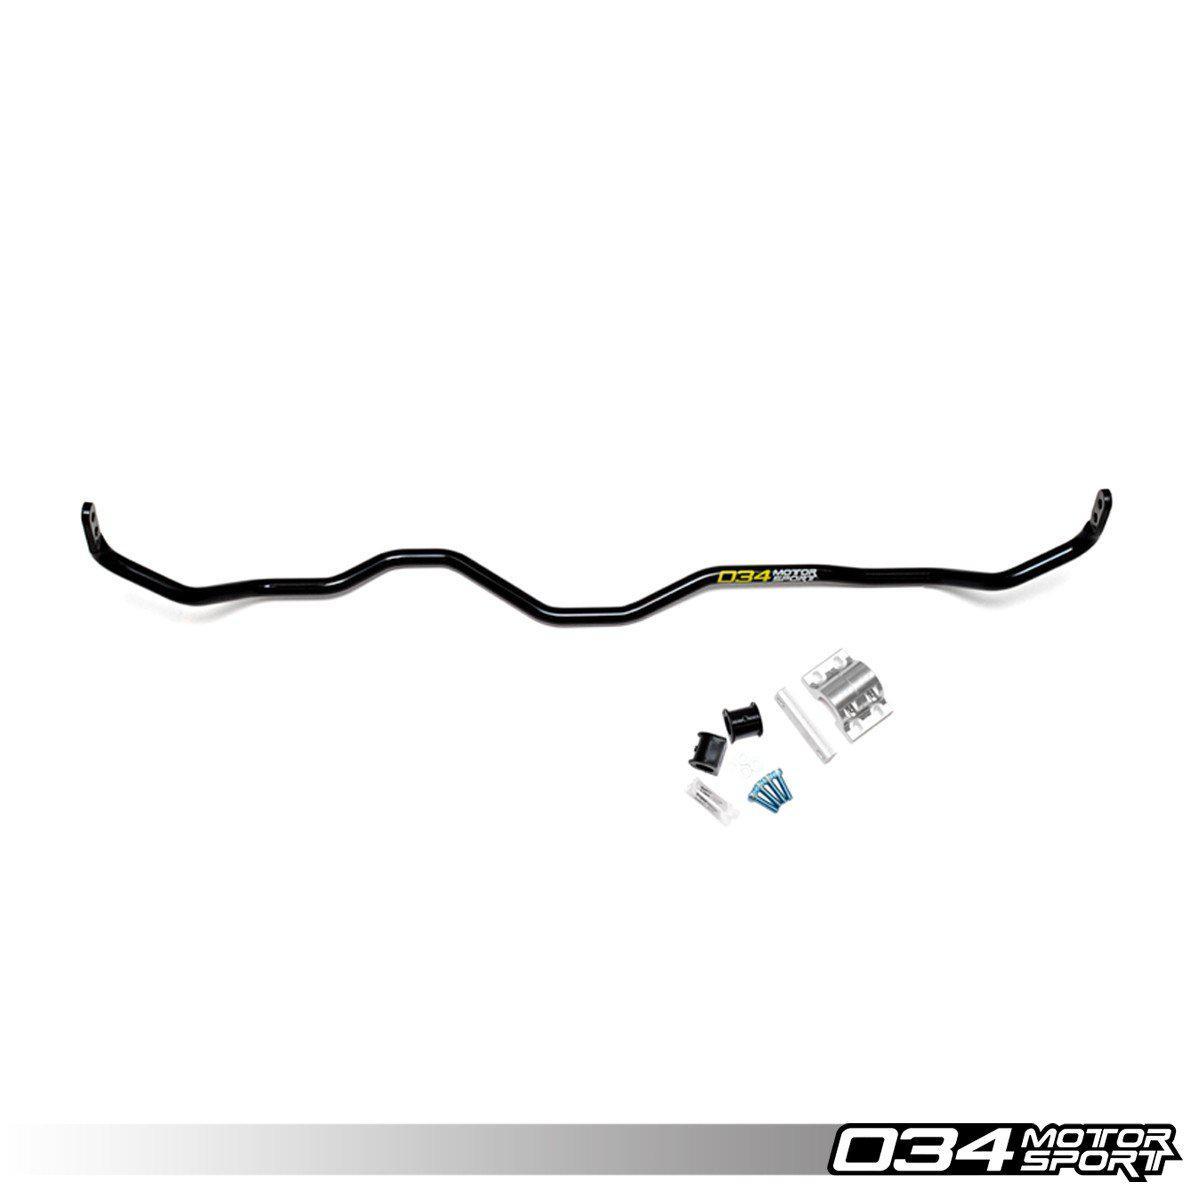 034Motorsport Dynamic+ Adjustable Rear Sway Bar, B9 Audi A4/S4, A5/S5/RS5, Allroad-A Little Tuning Co